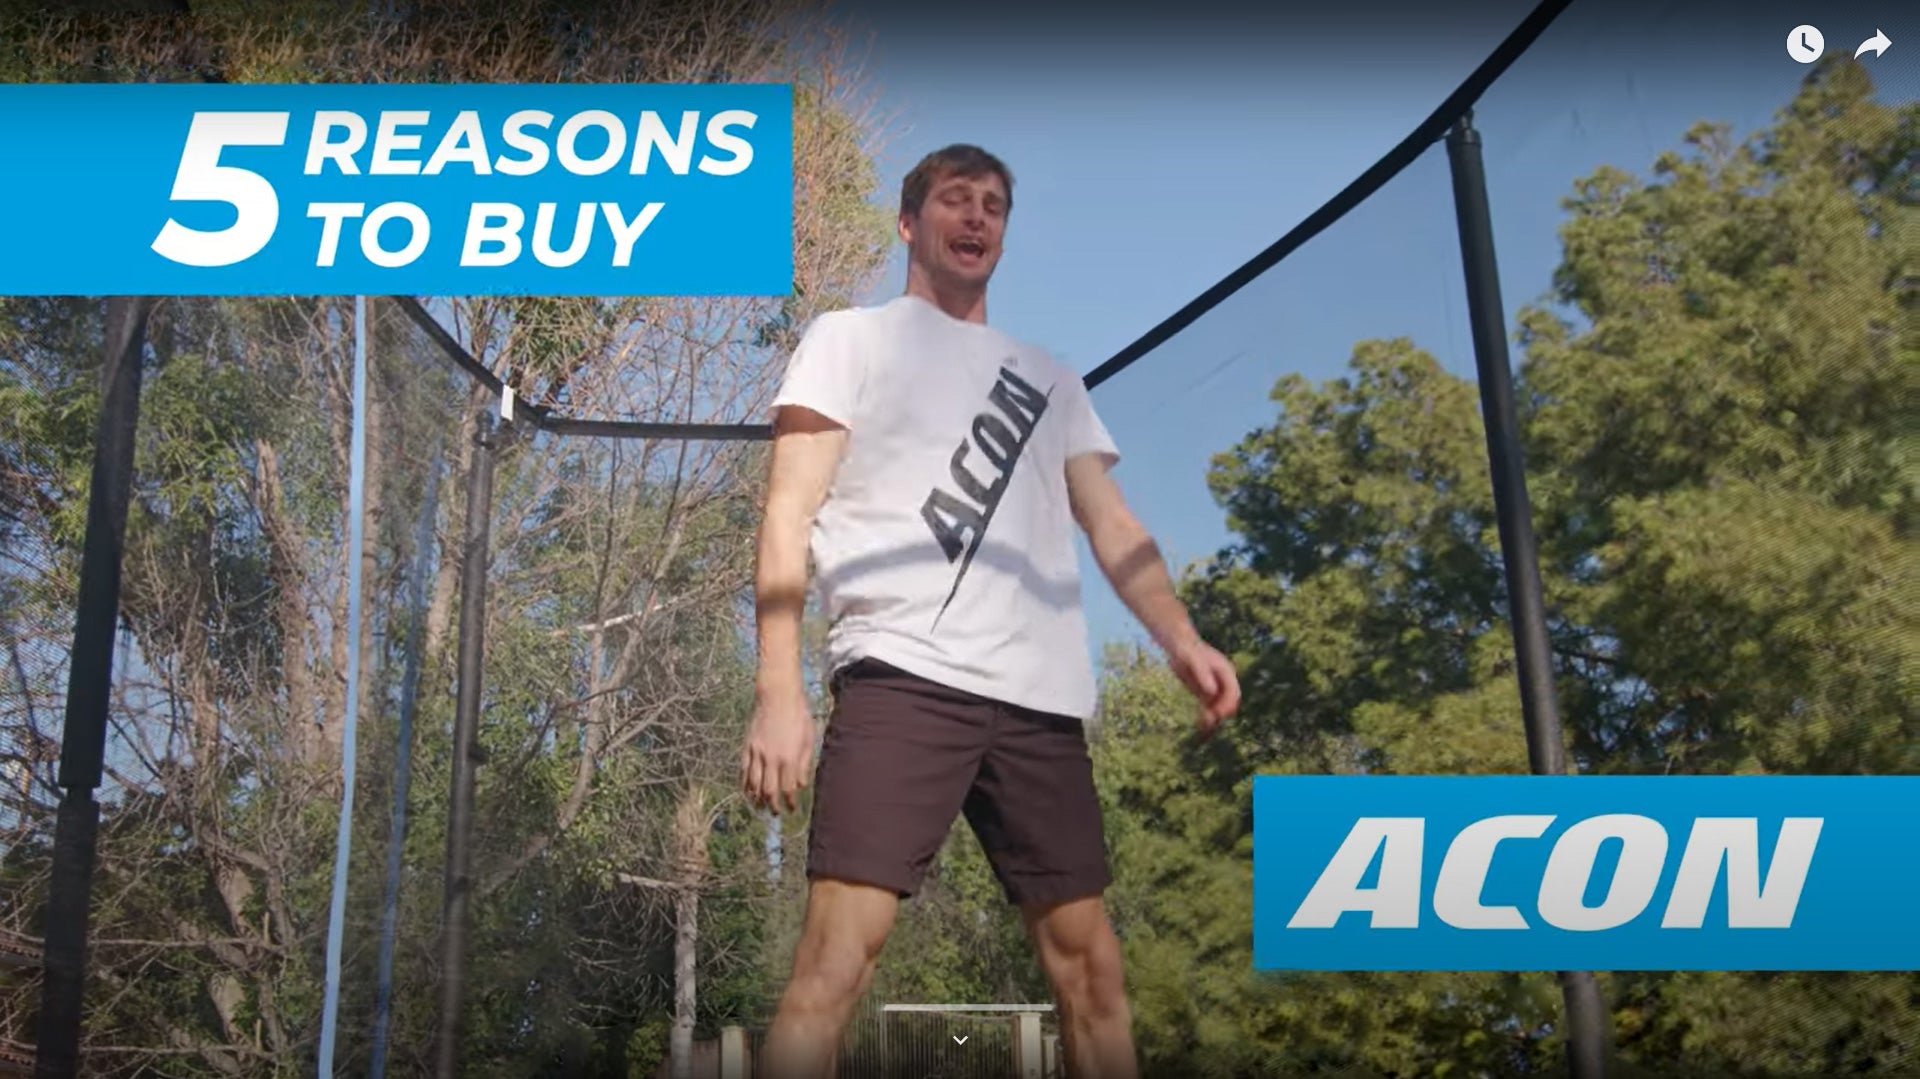 5 reasons to buy Acon - video placeholder